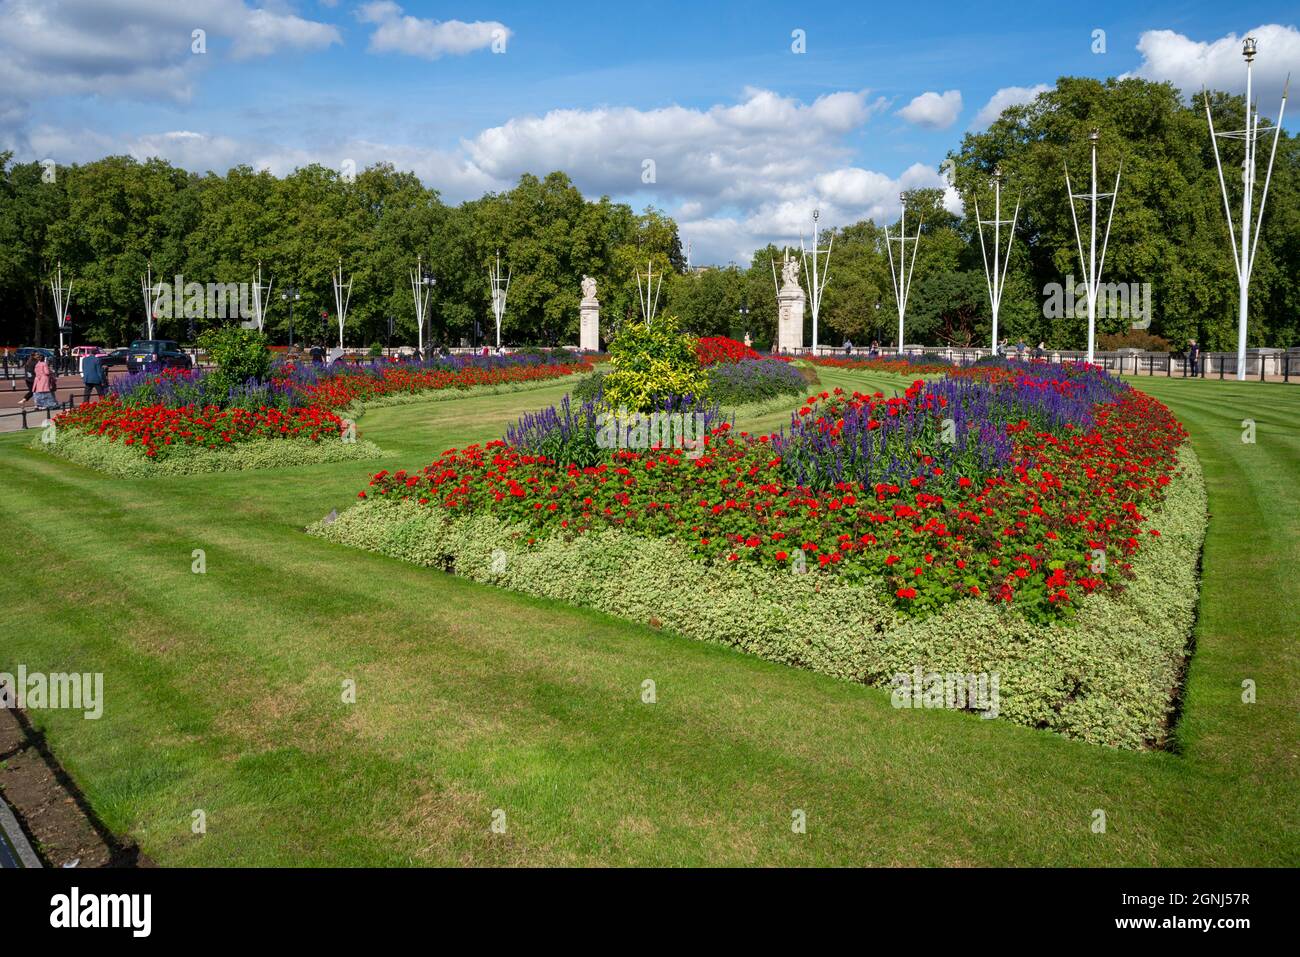 Buckingham Palace Memorial Gardens, alongside The Mall, in London, UK. Mown, well kept lawn around flower beds Stock Photo